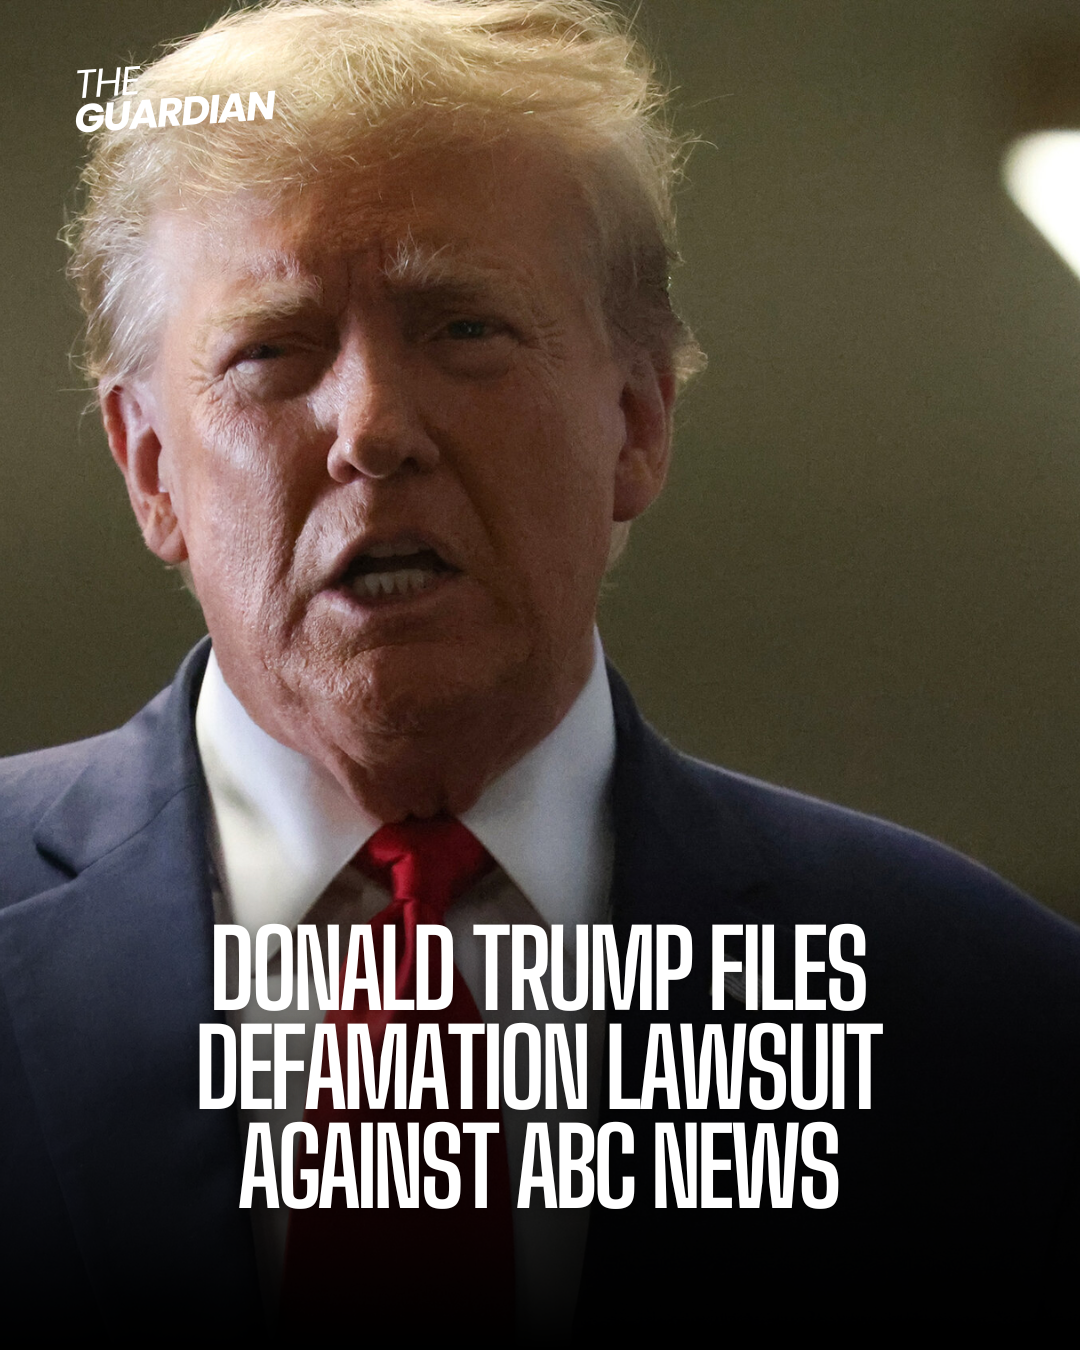 Former US President Donald Trump has filed a defamation lawsuit against ABC News and George Stephanopoulos.